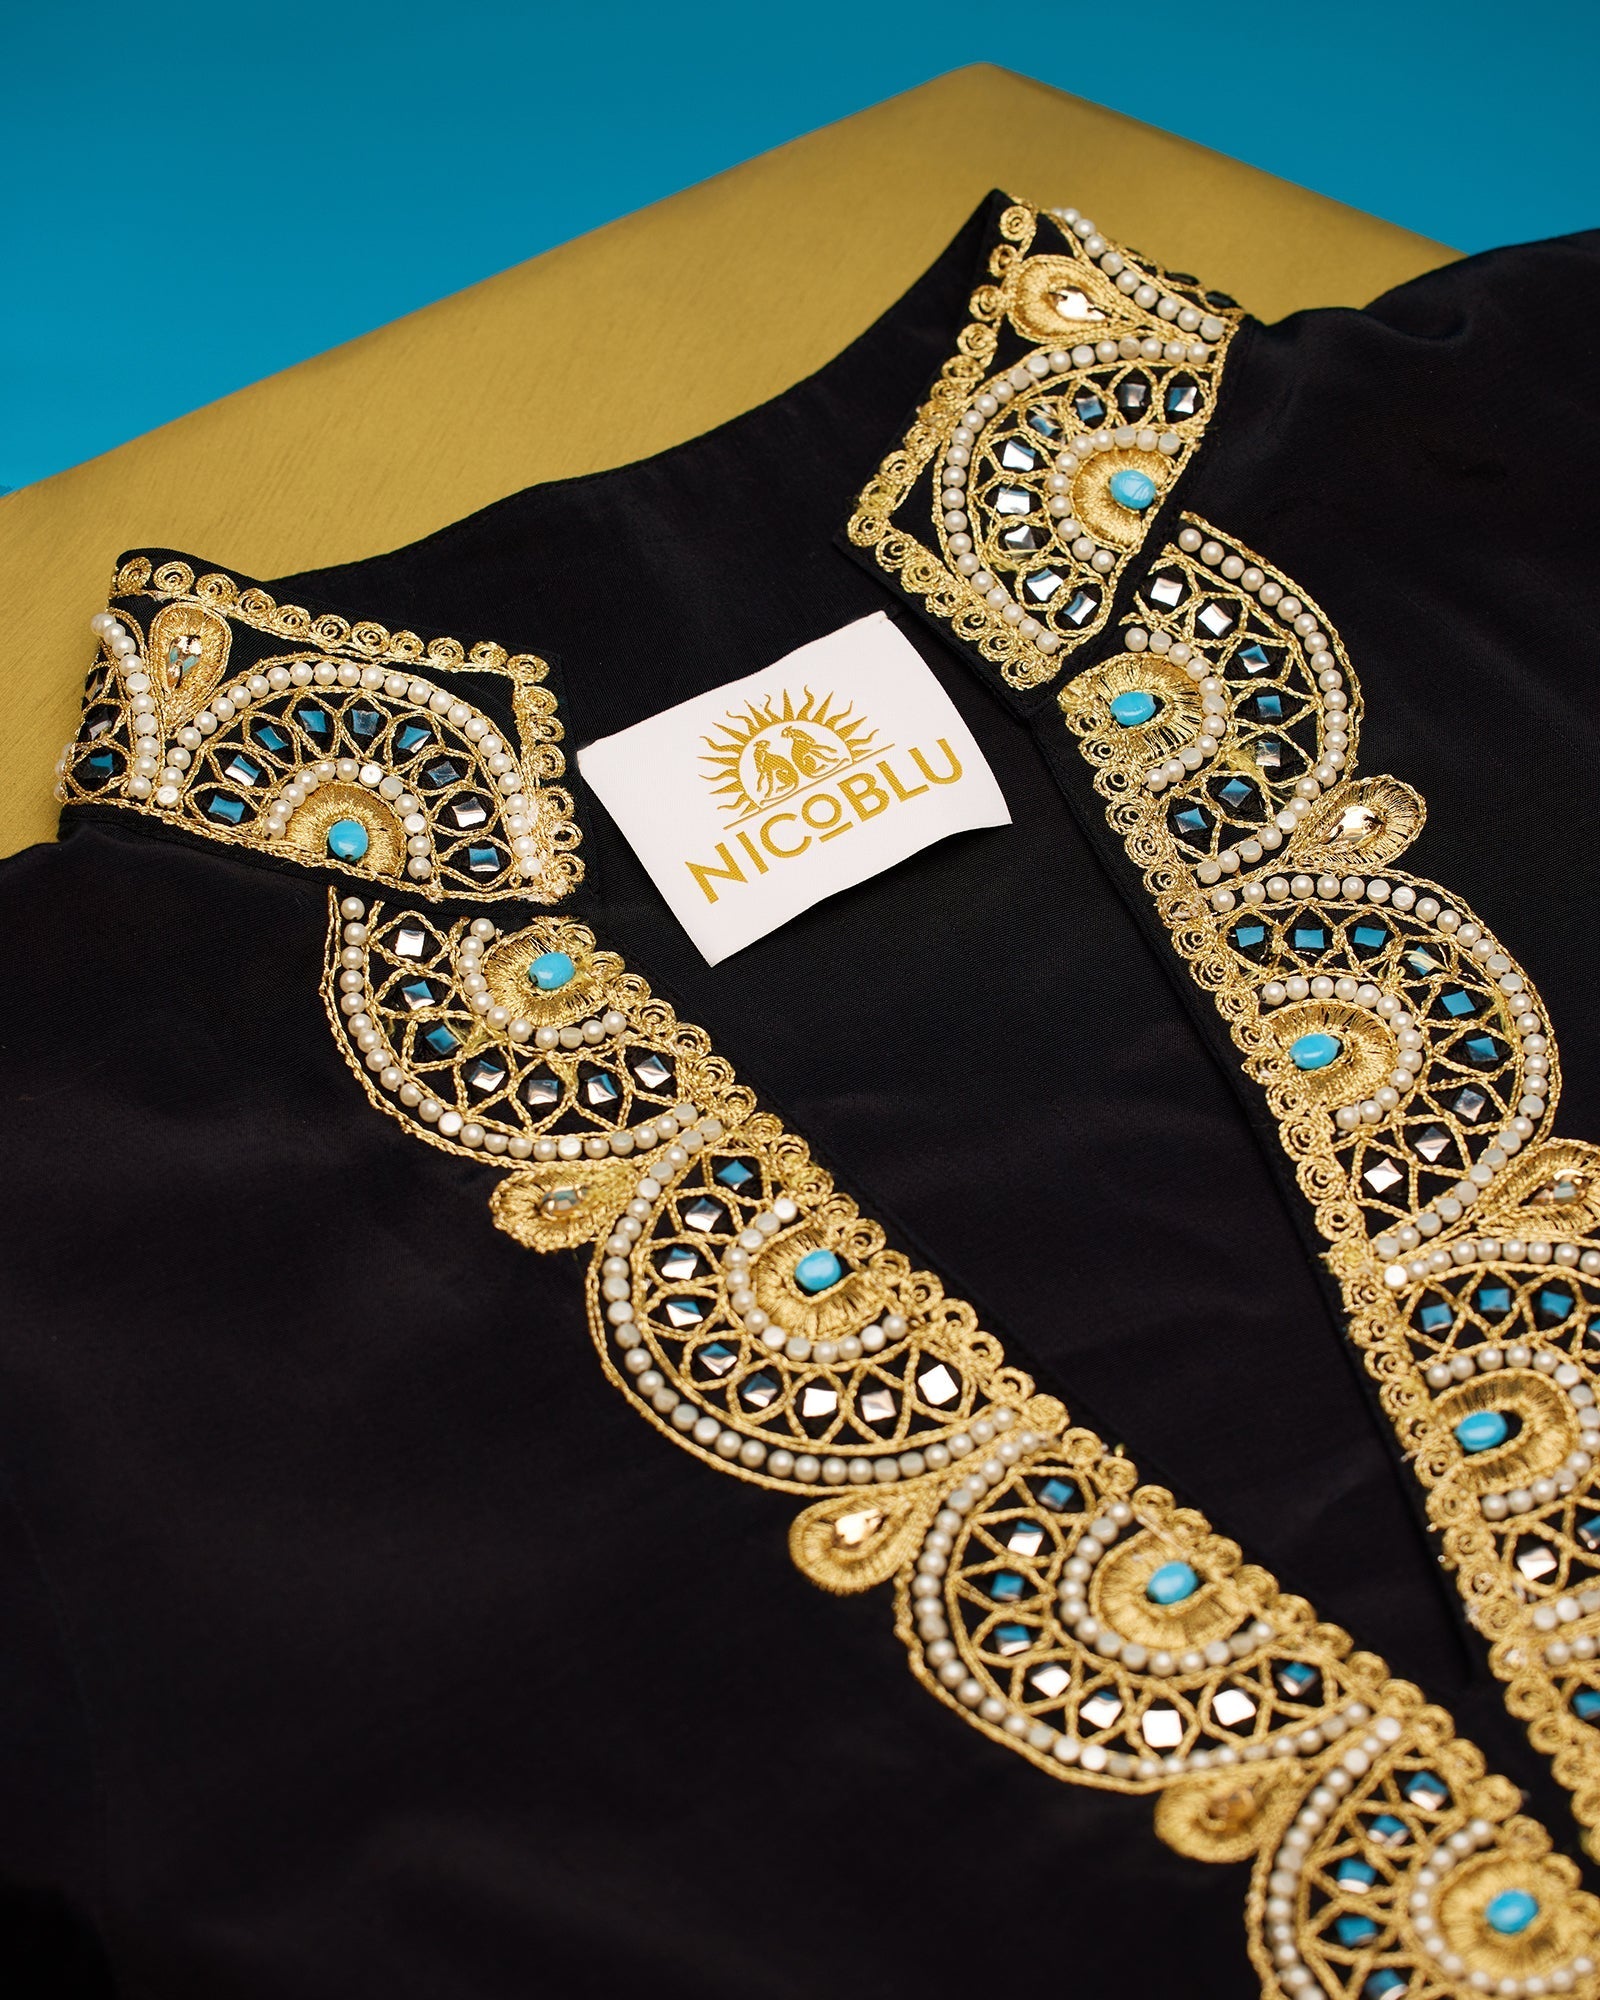 Noor Long Black Tunic Dress with Gold Embellishment-Detail of Neckline Gold and Turquoise Embellishment